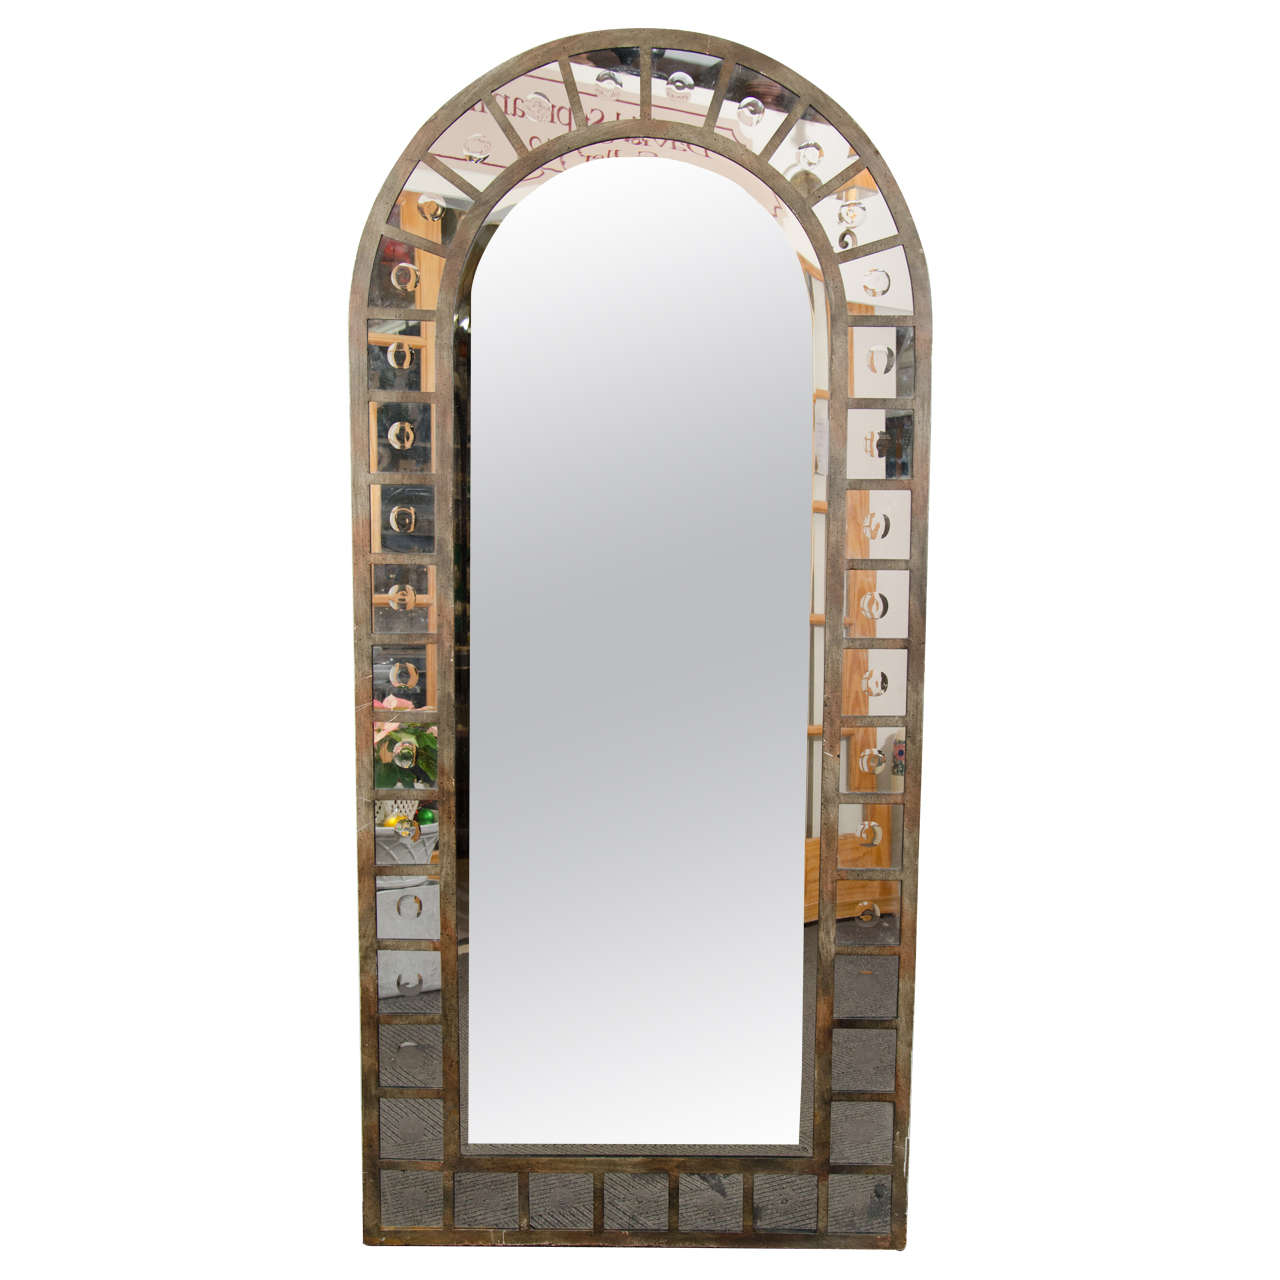 Industrial Modern Style Steel Arched Mirror